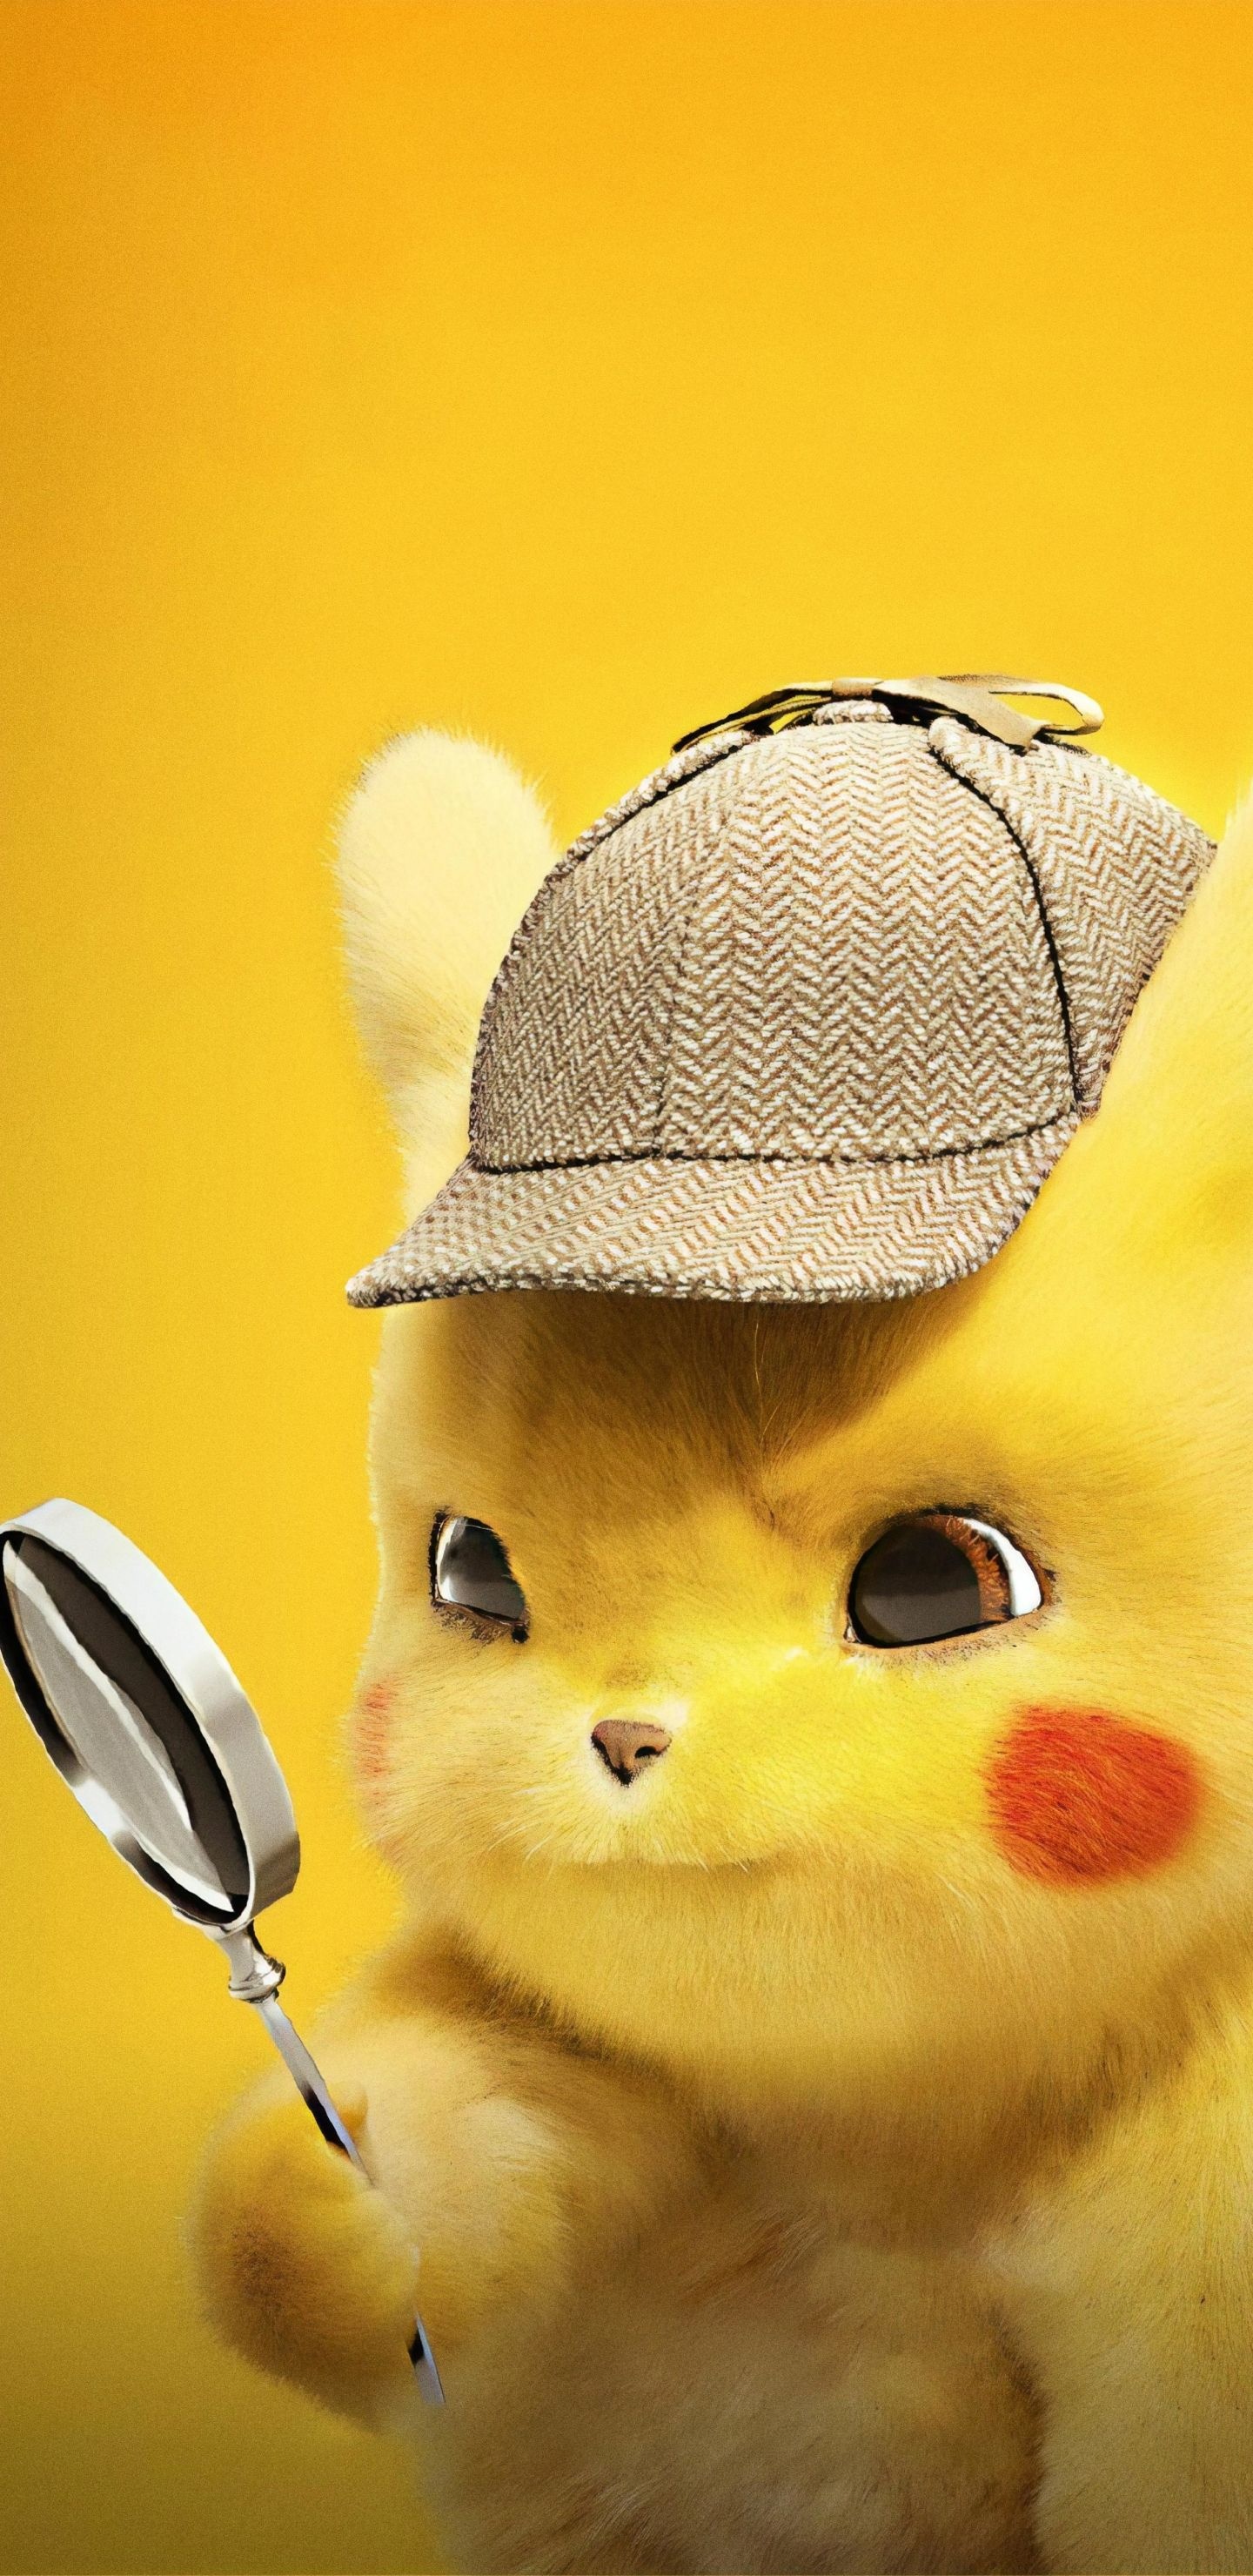 Pokemon Detective Pikachu: Filming took place from January to May 2018 in Colorado, England, and Scotland. 1440x2960 HD Wallpaper.